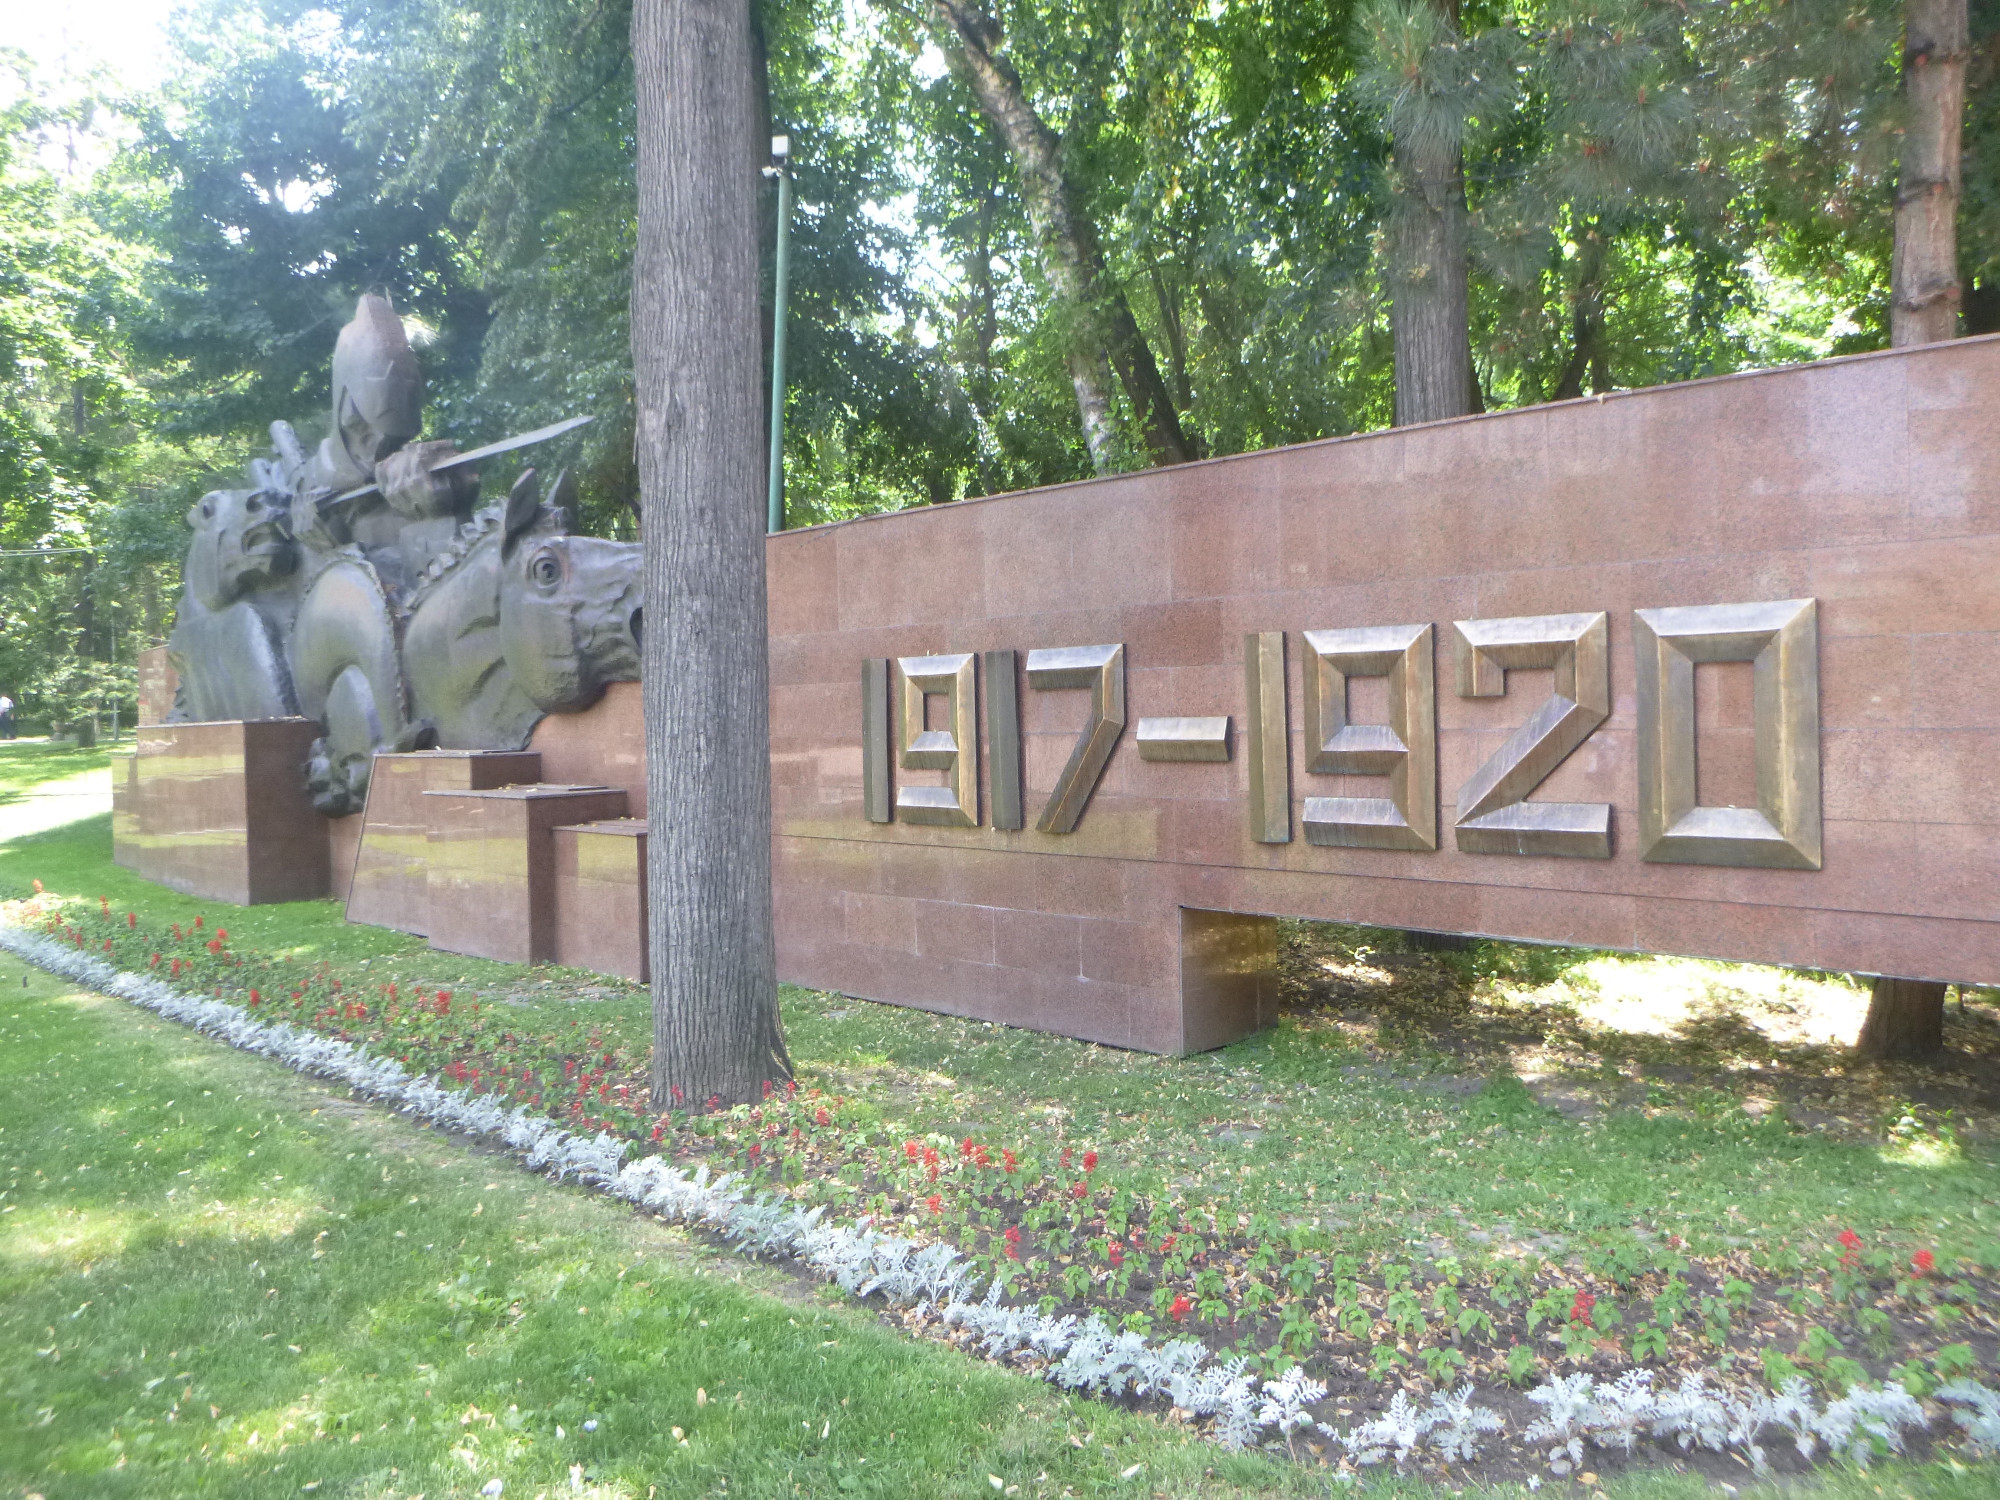 memorial to the Russian Revolution, or what the Kazakhs call the Civil War (1917-1920):